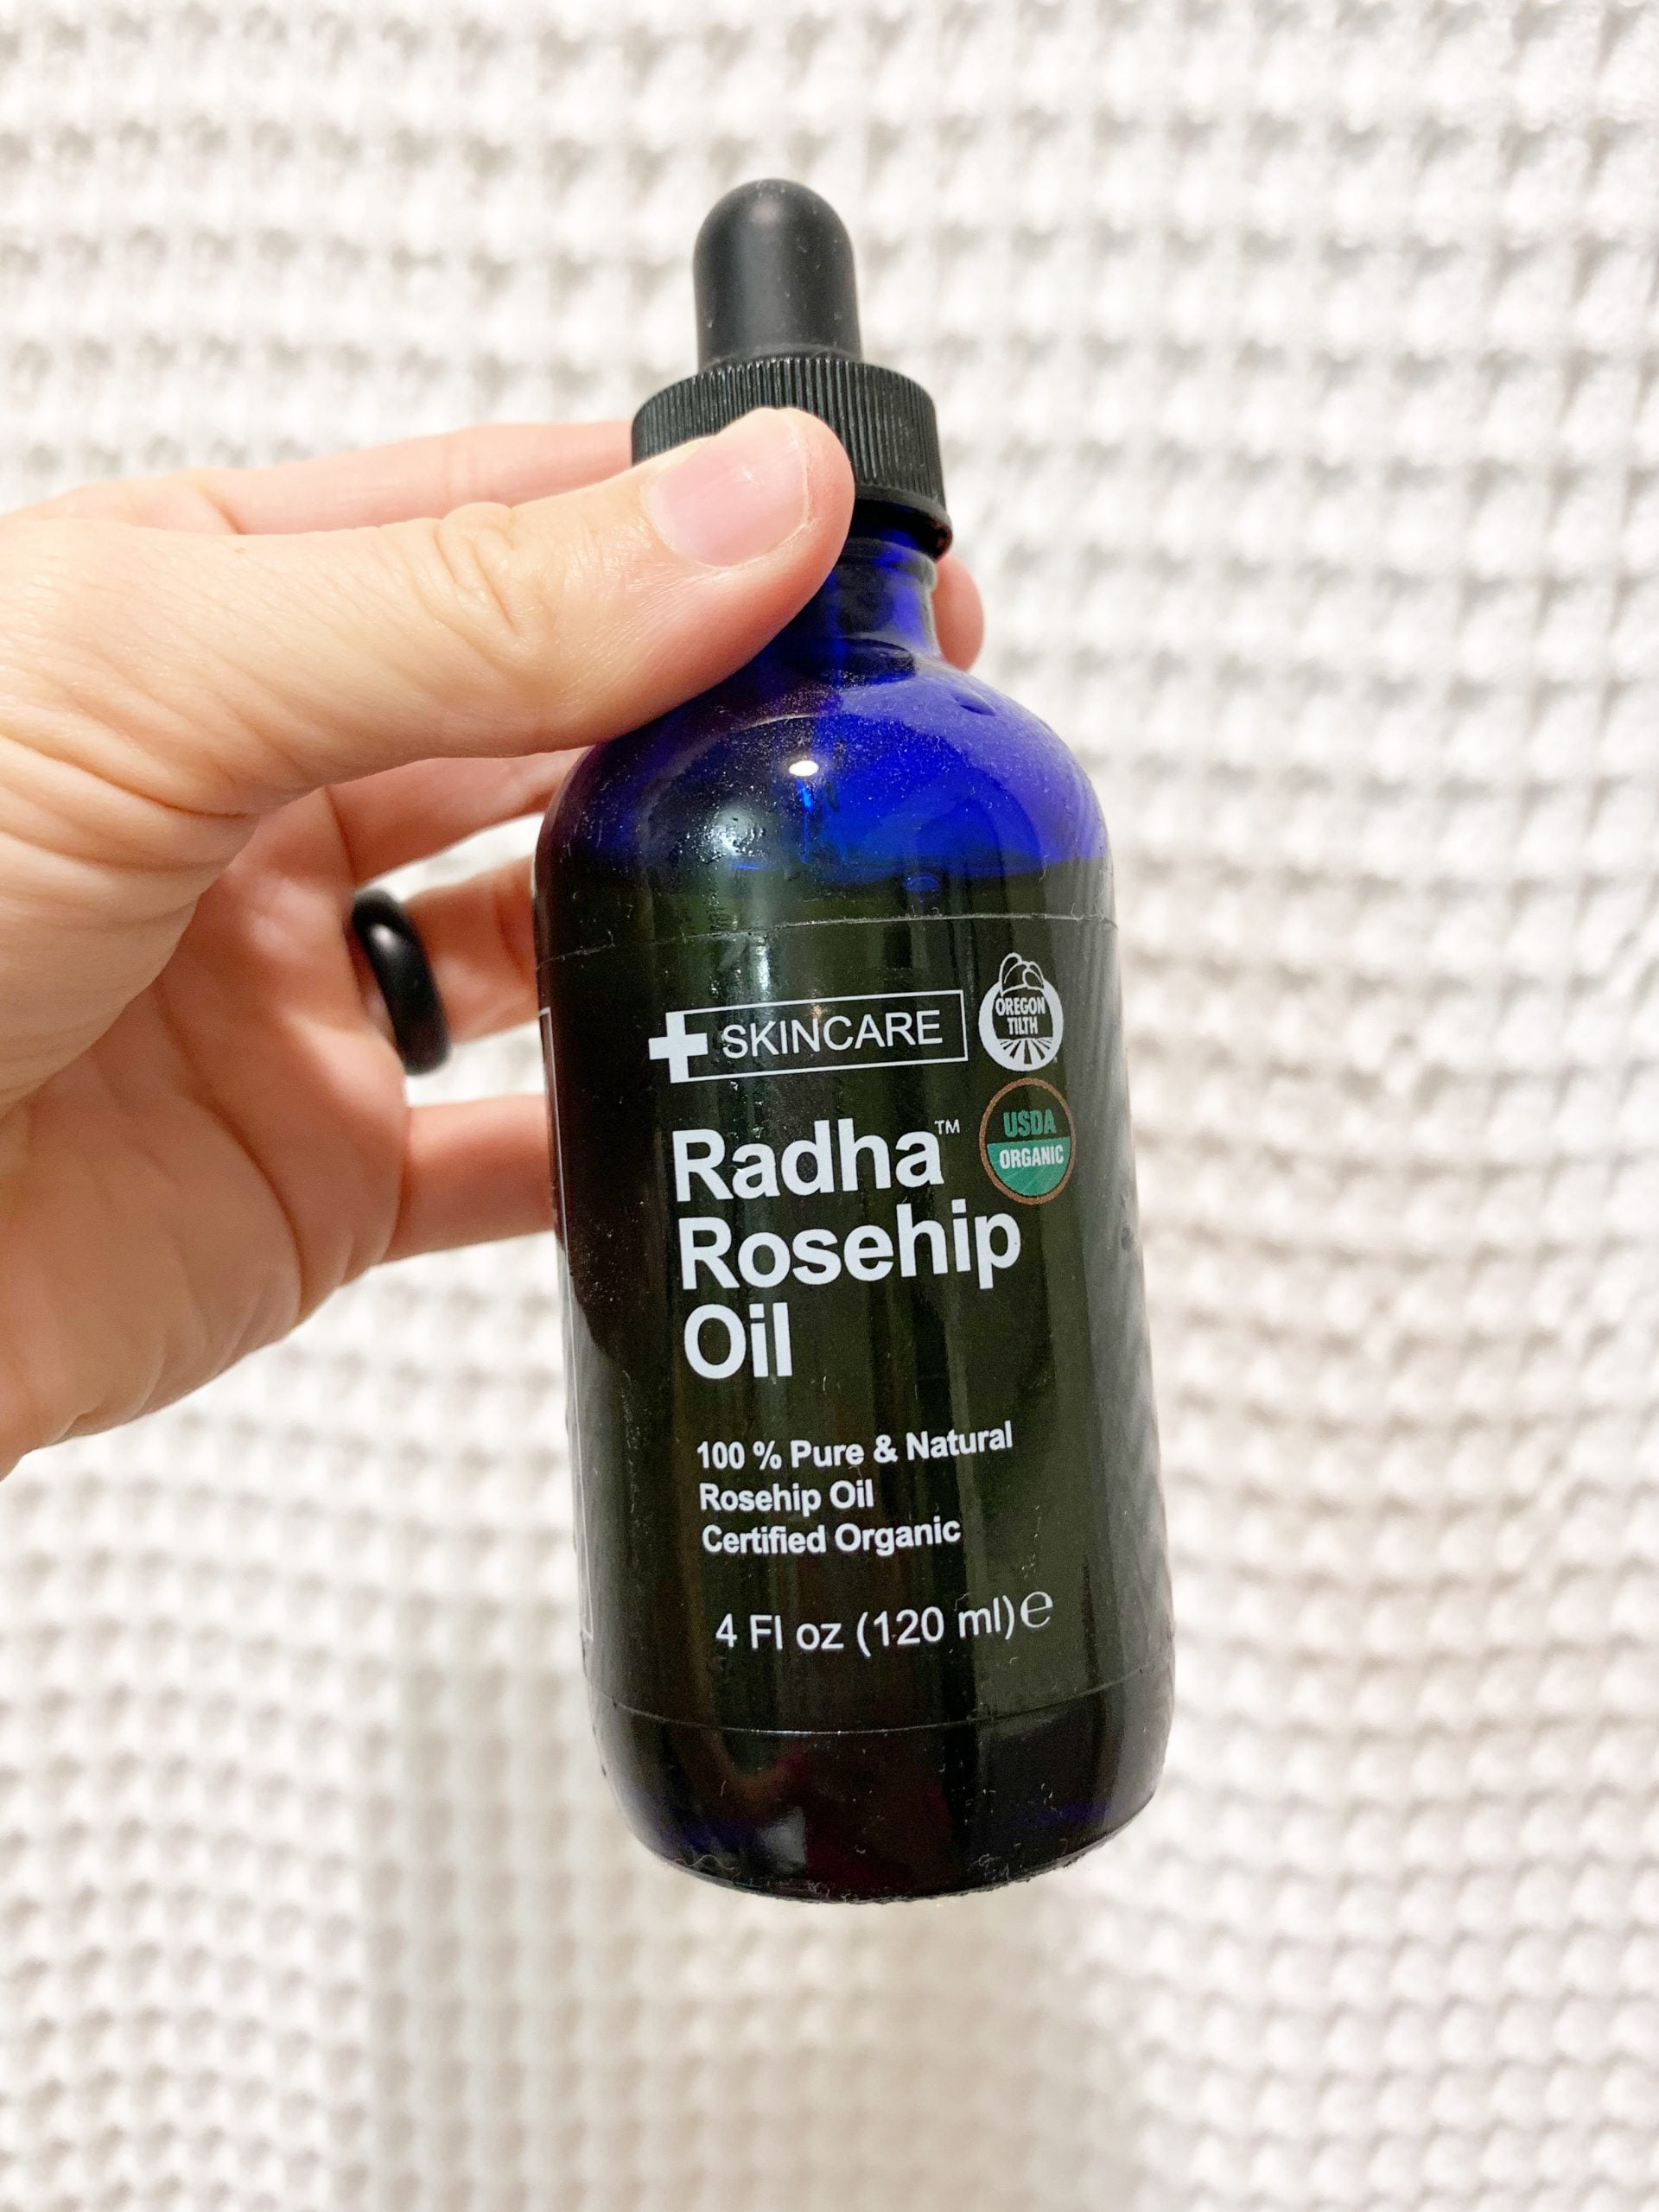 Radha Rosehip Oil - How Rosehip Seed Oil Changed My Skin - Have you heard of this skincare super charge? I'm sharing why rosehip oil is a beauty must-have! | Rosehip Seed Oil Benefits - Rosehip Seed Oil For Skin - Rosehip Oil 